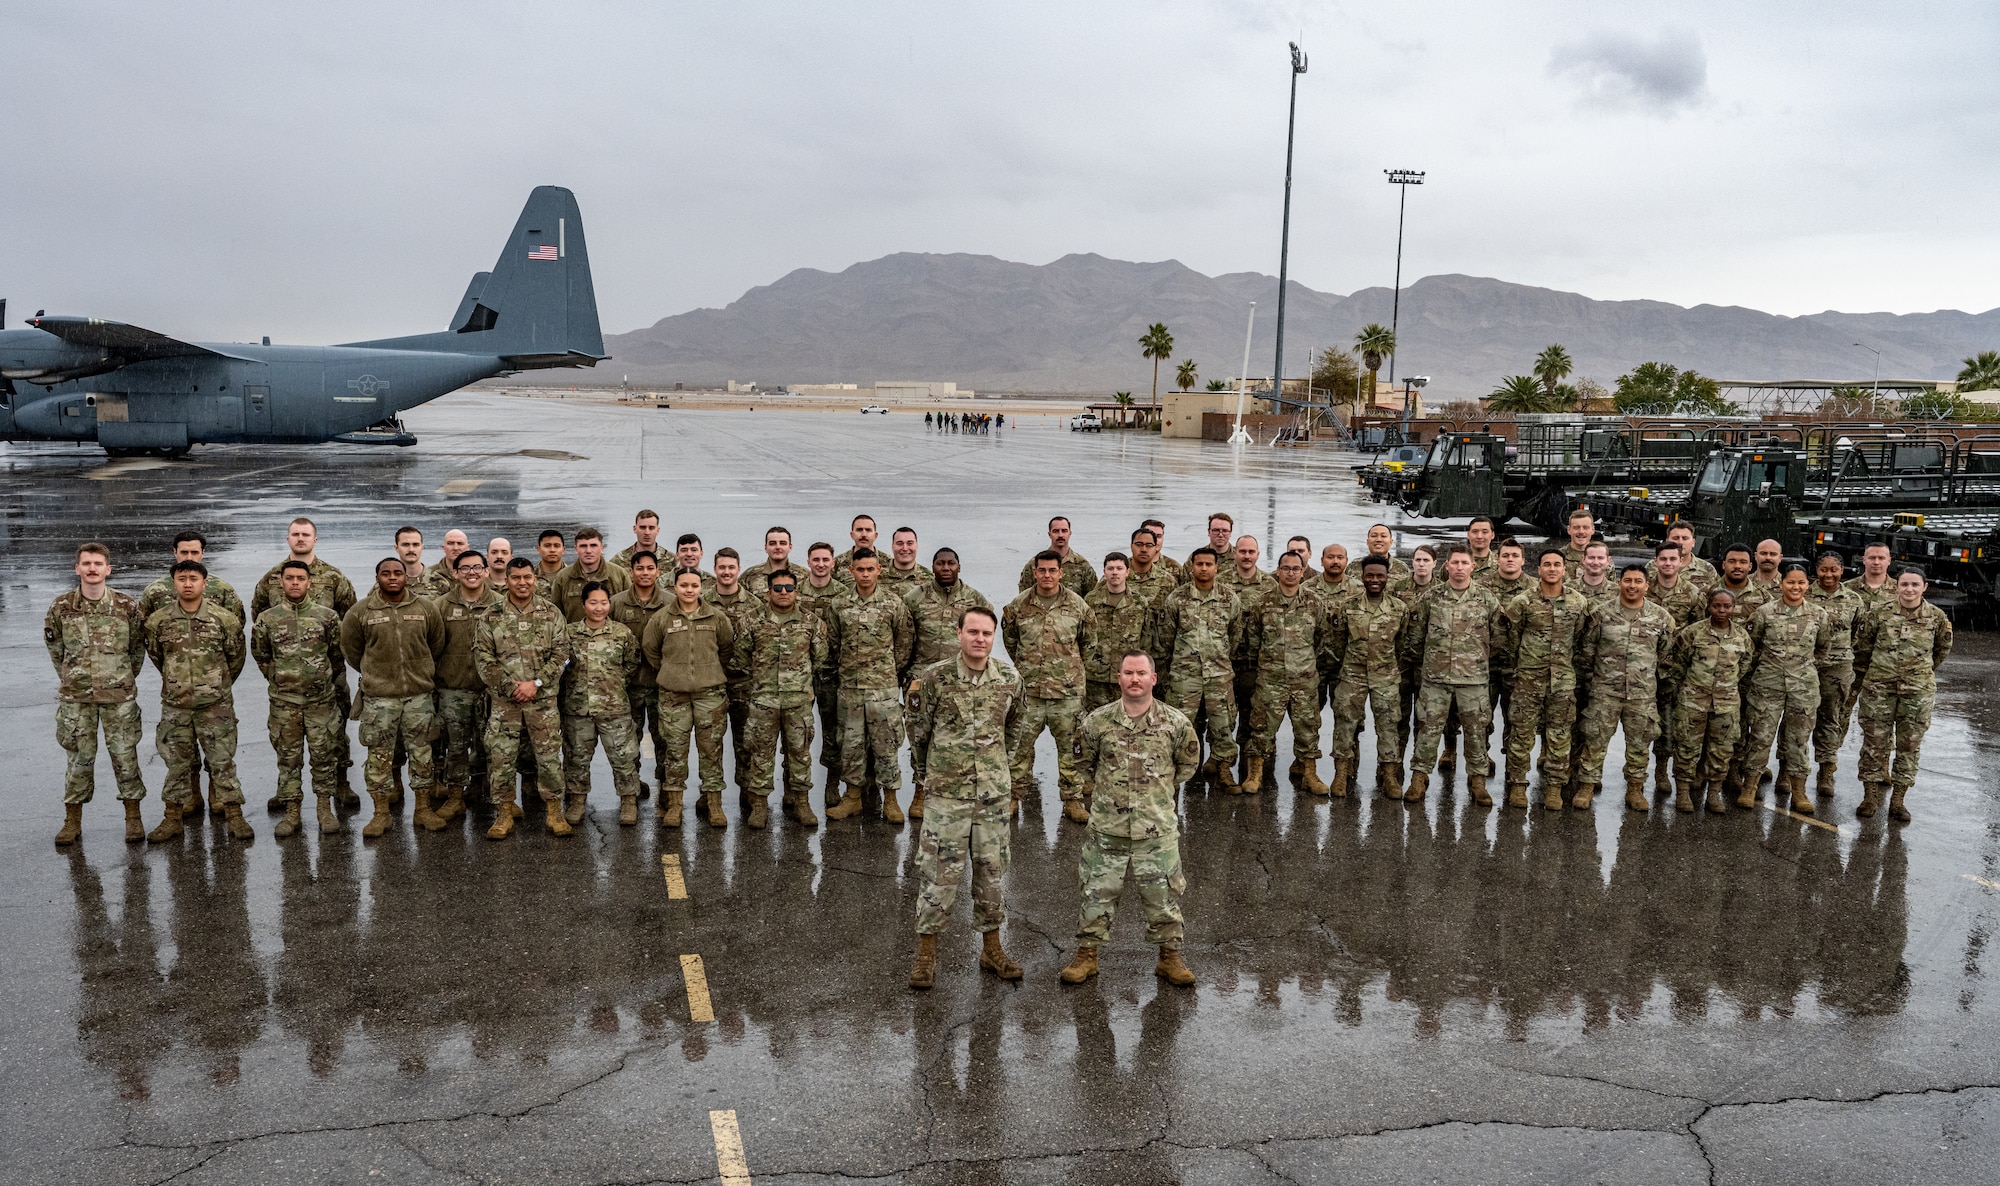 The U.S. Air Force's first Air Mobility Element poses for a photo during Exercise Bamboo Eagle 24-1 at Nellis Air Force Base, Nevada, Feb. 4, 2024.